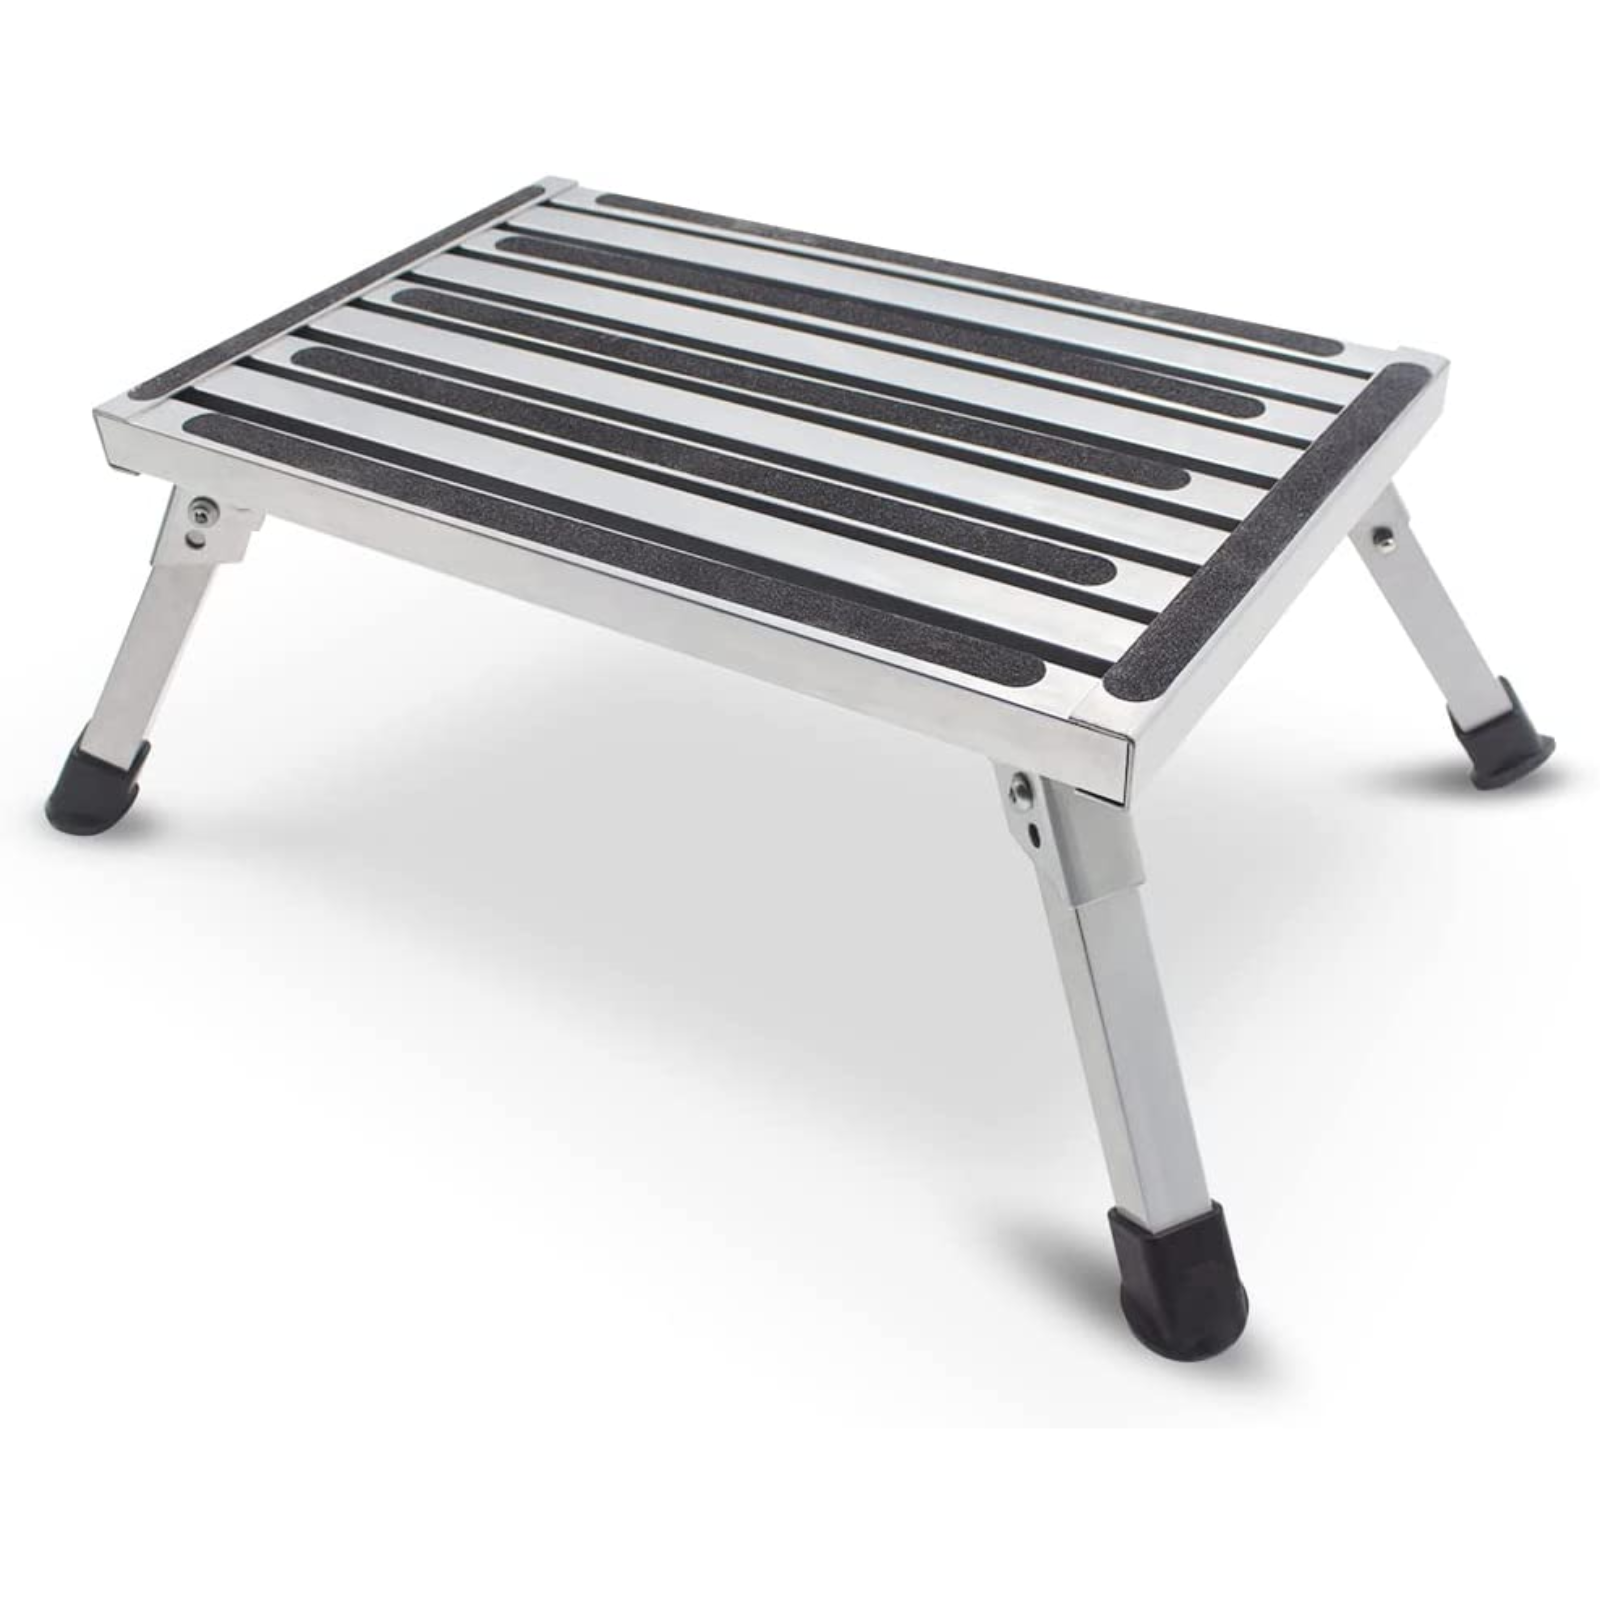 BESTOOL RV Steps | RV Step Stool Steel Folding Platform Step with Non-Slip Rubber Feet | Durable Construction | 15" x 10", Supports Up to 330 lb